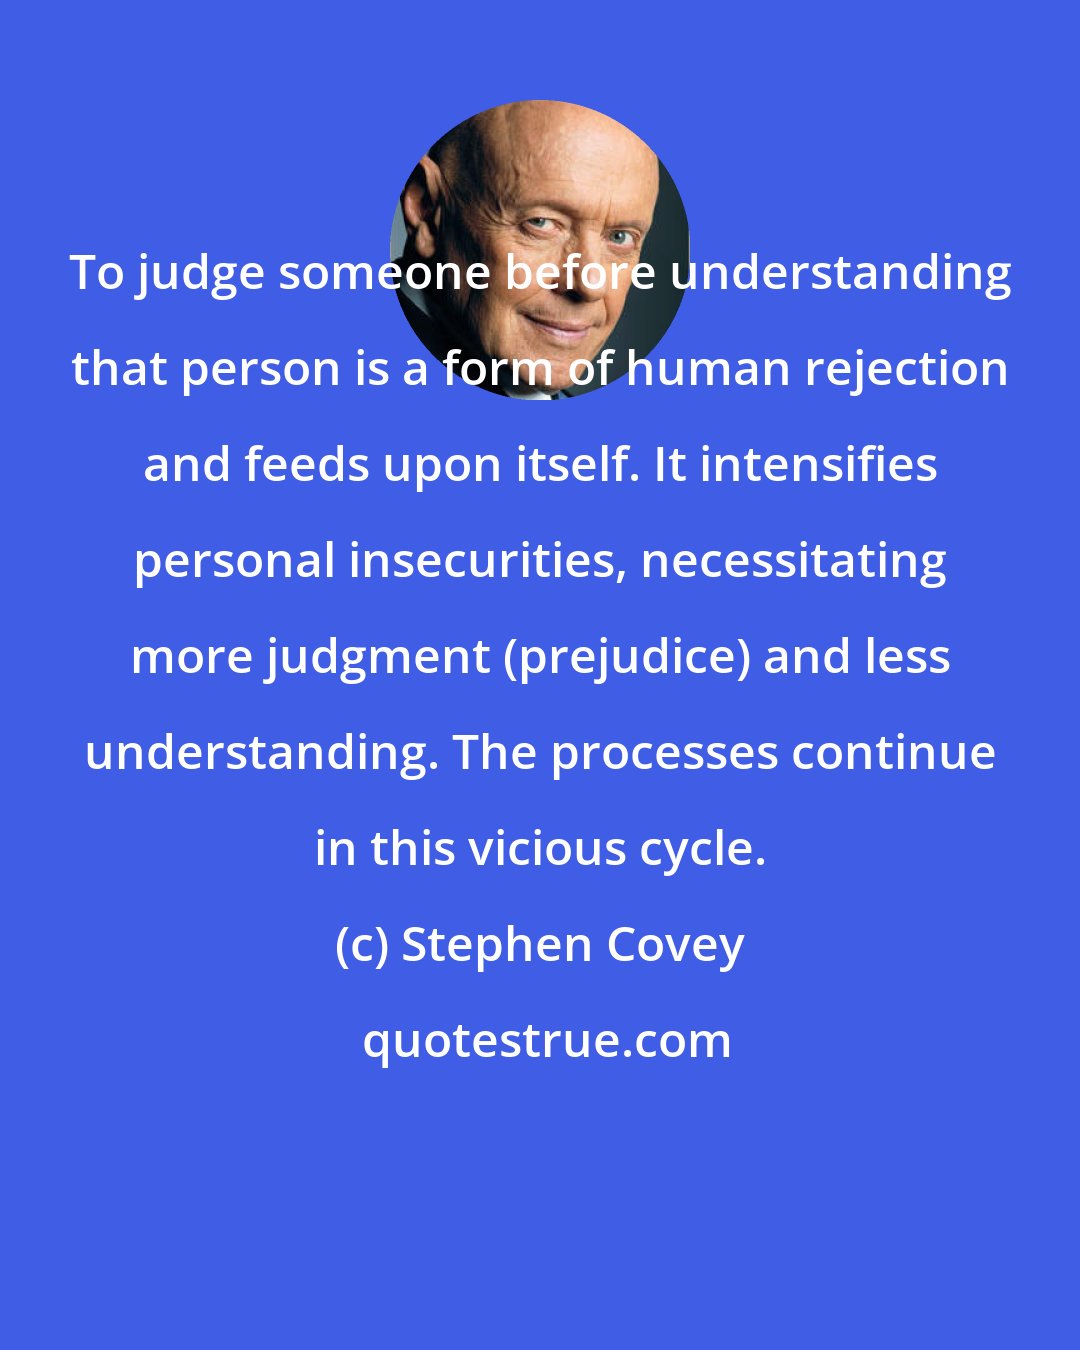 Stephen Covey: To judge someone before understanding that person is a form of human rejection and feeds upon itself. It intensifies personal insecurities, necessitating more judgment (prejudice) and less understanding. The processes continue in this vicious cycle.